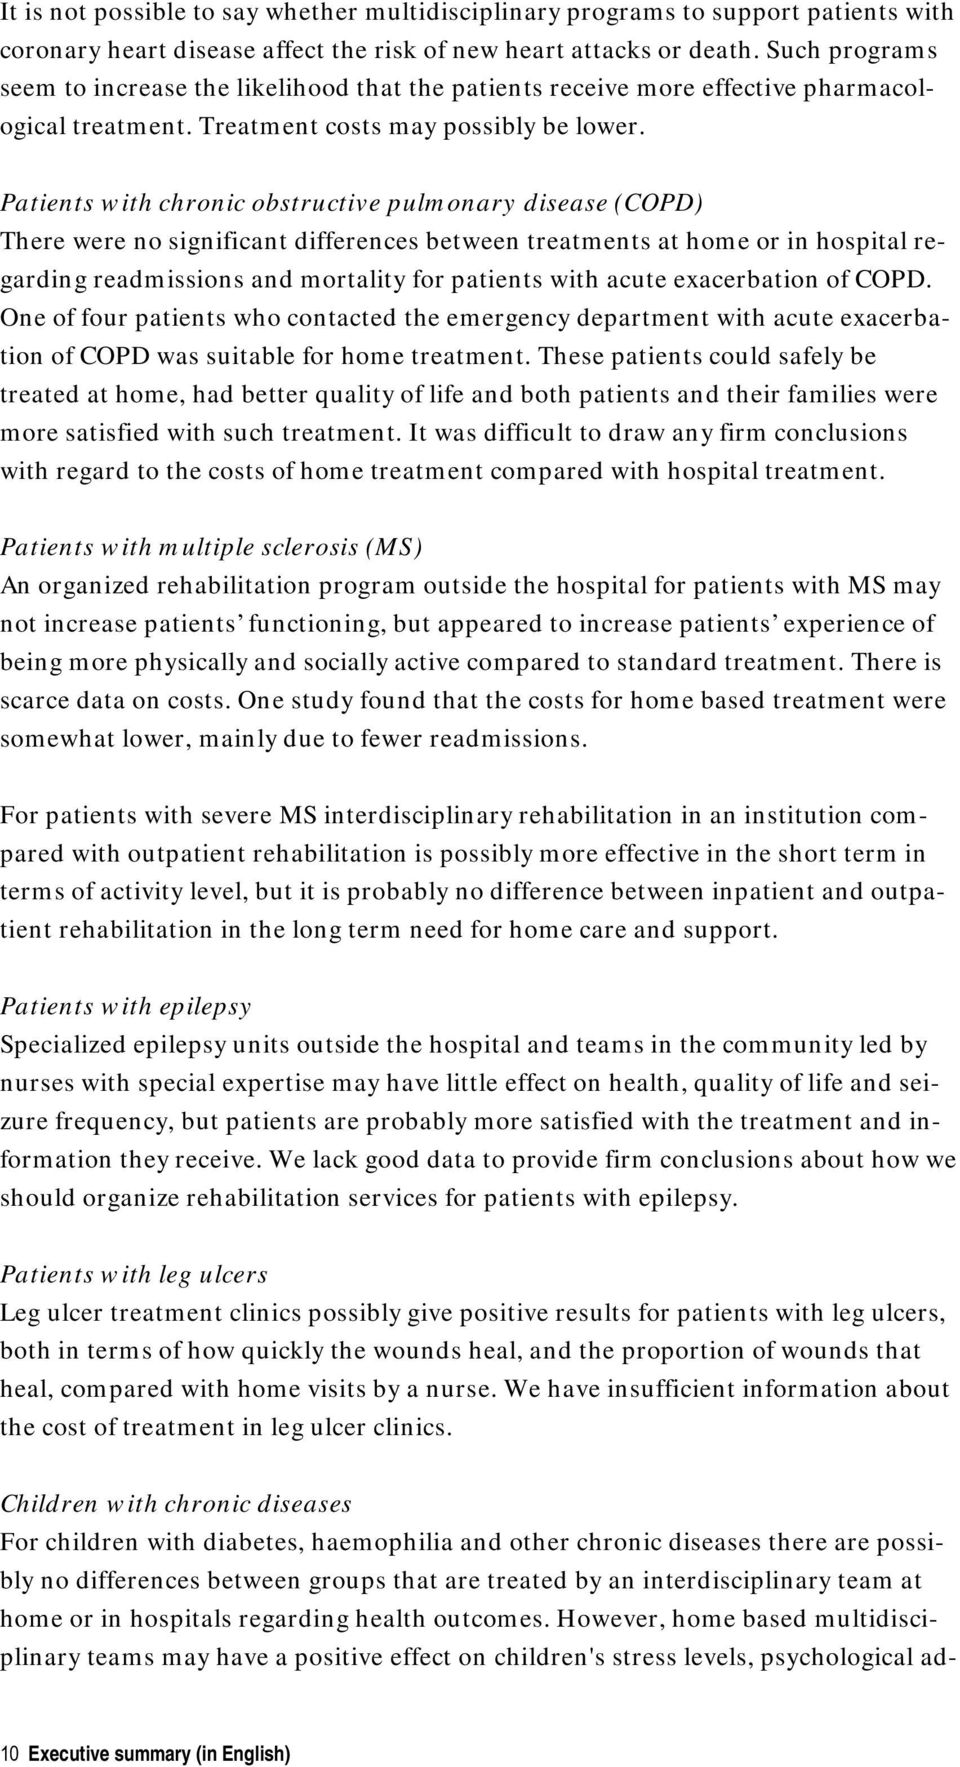 Patients with chronic obstructive pulmonary disease (COPD) There were no significant differences between treatments at home or in hospital regarding readmissions and mortality for patients with acute